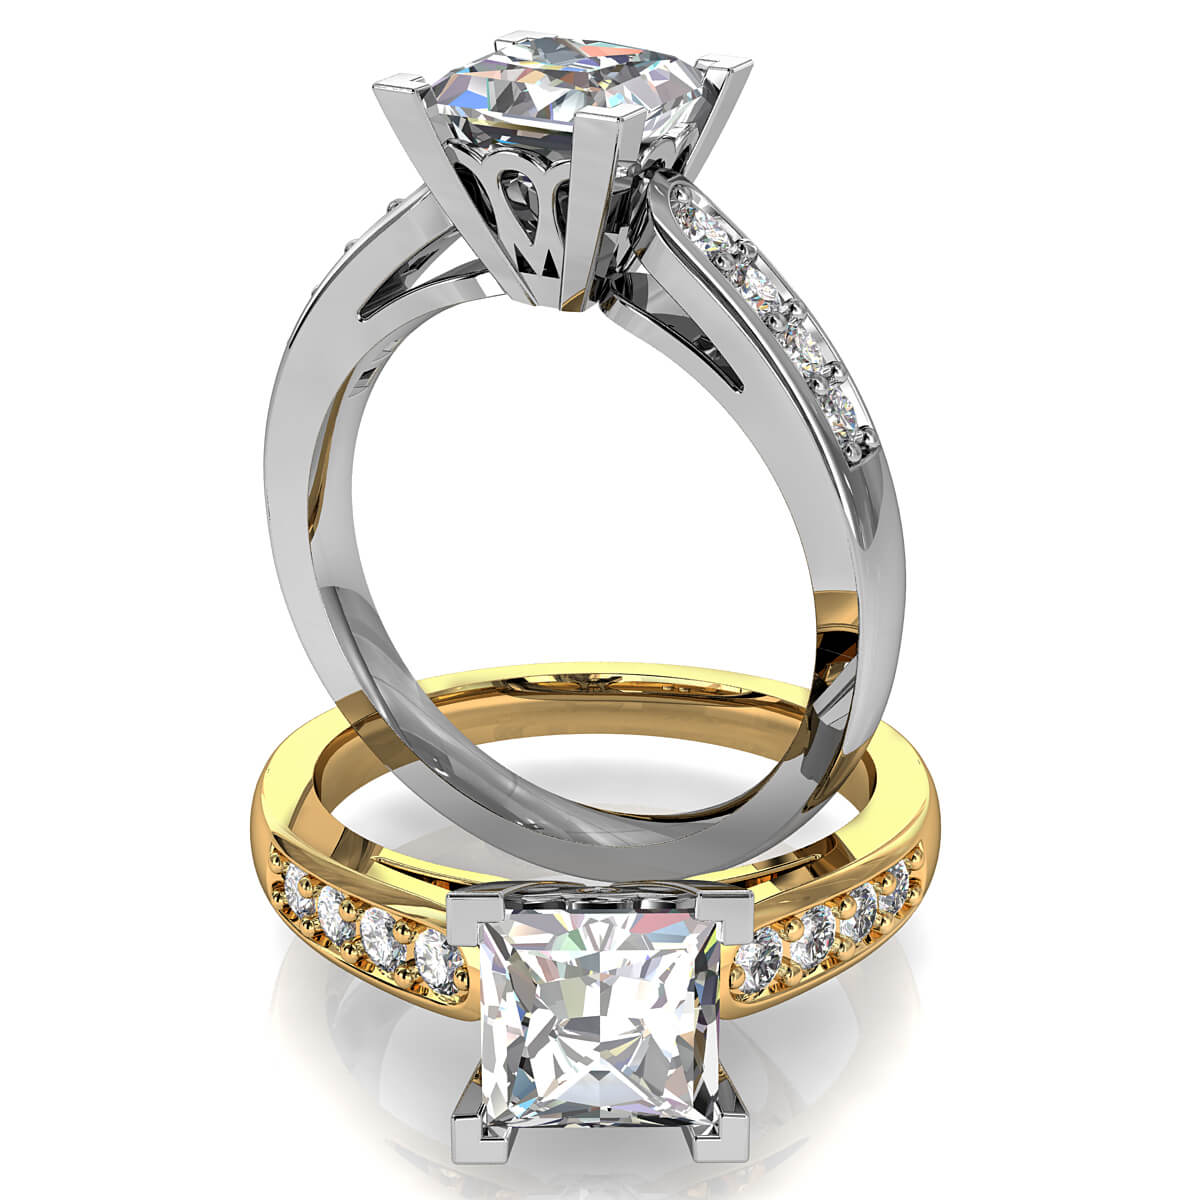 Princess Cut Solitaire Diamond Engagement Ring, 4 Corner Claws on a Bead Set Band with Lotus Support Bar.